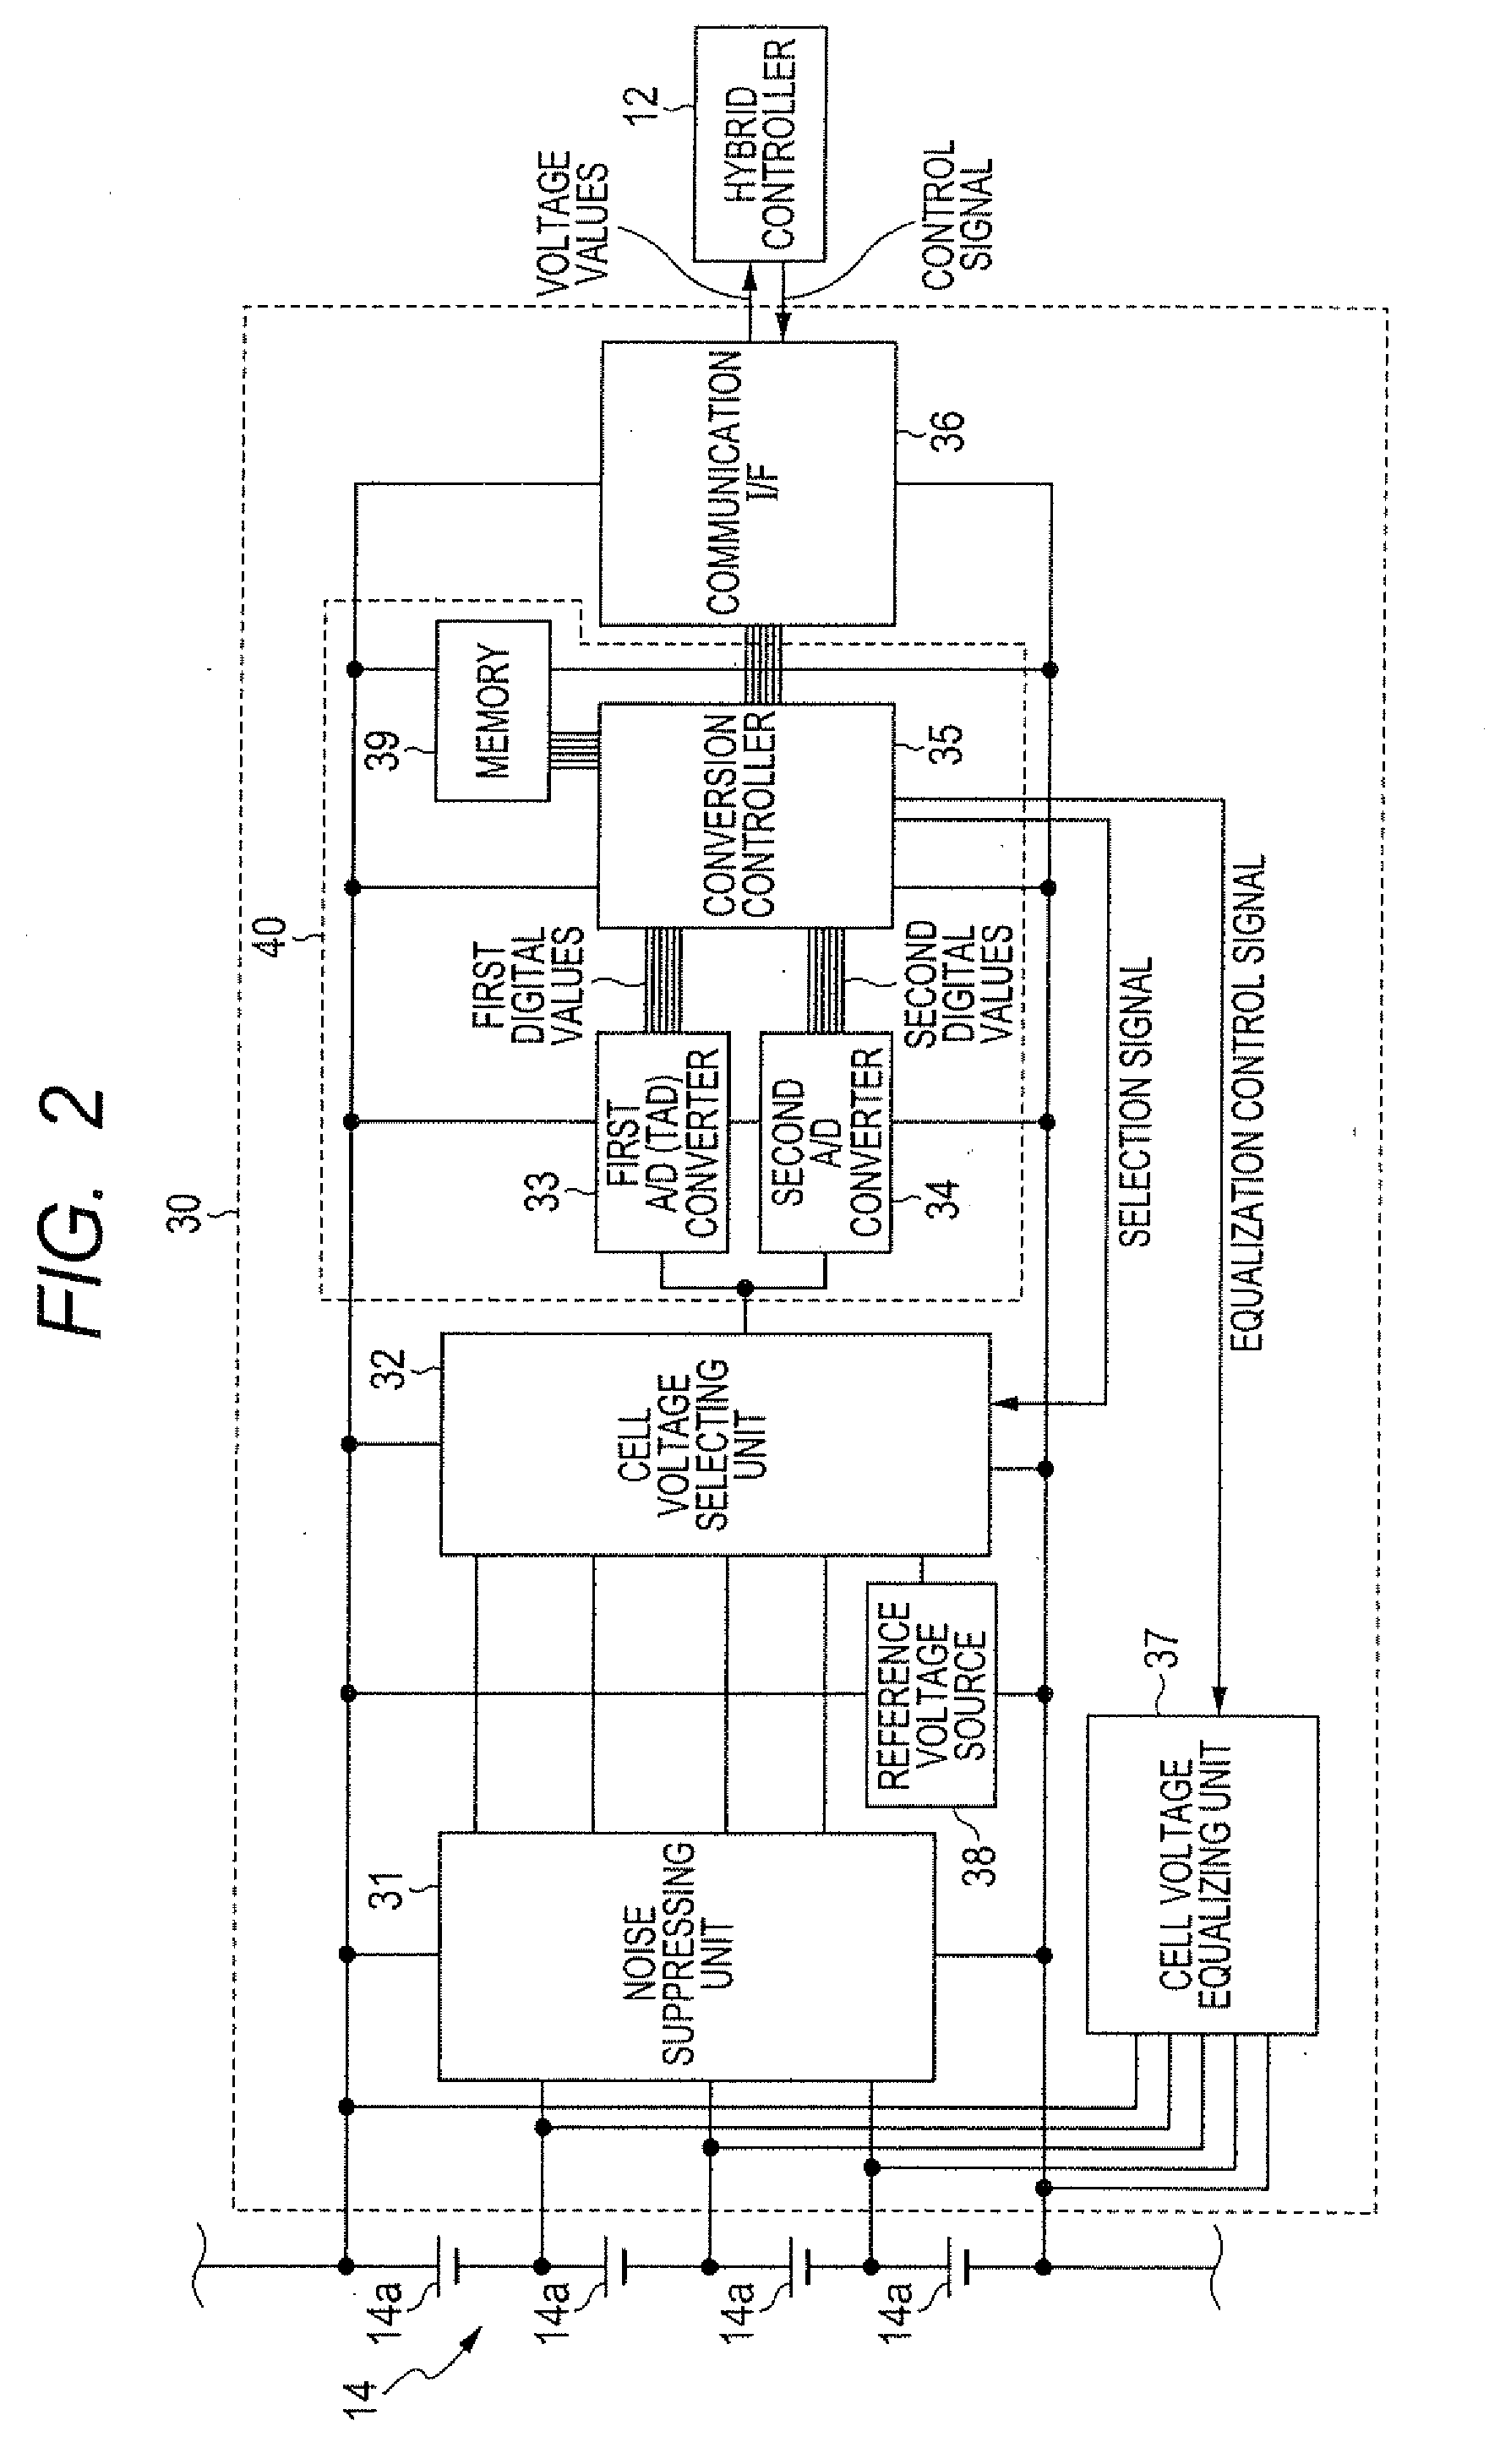 Device for converting analog signal into digital values and correcting the values